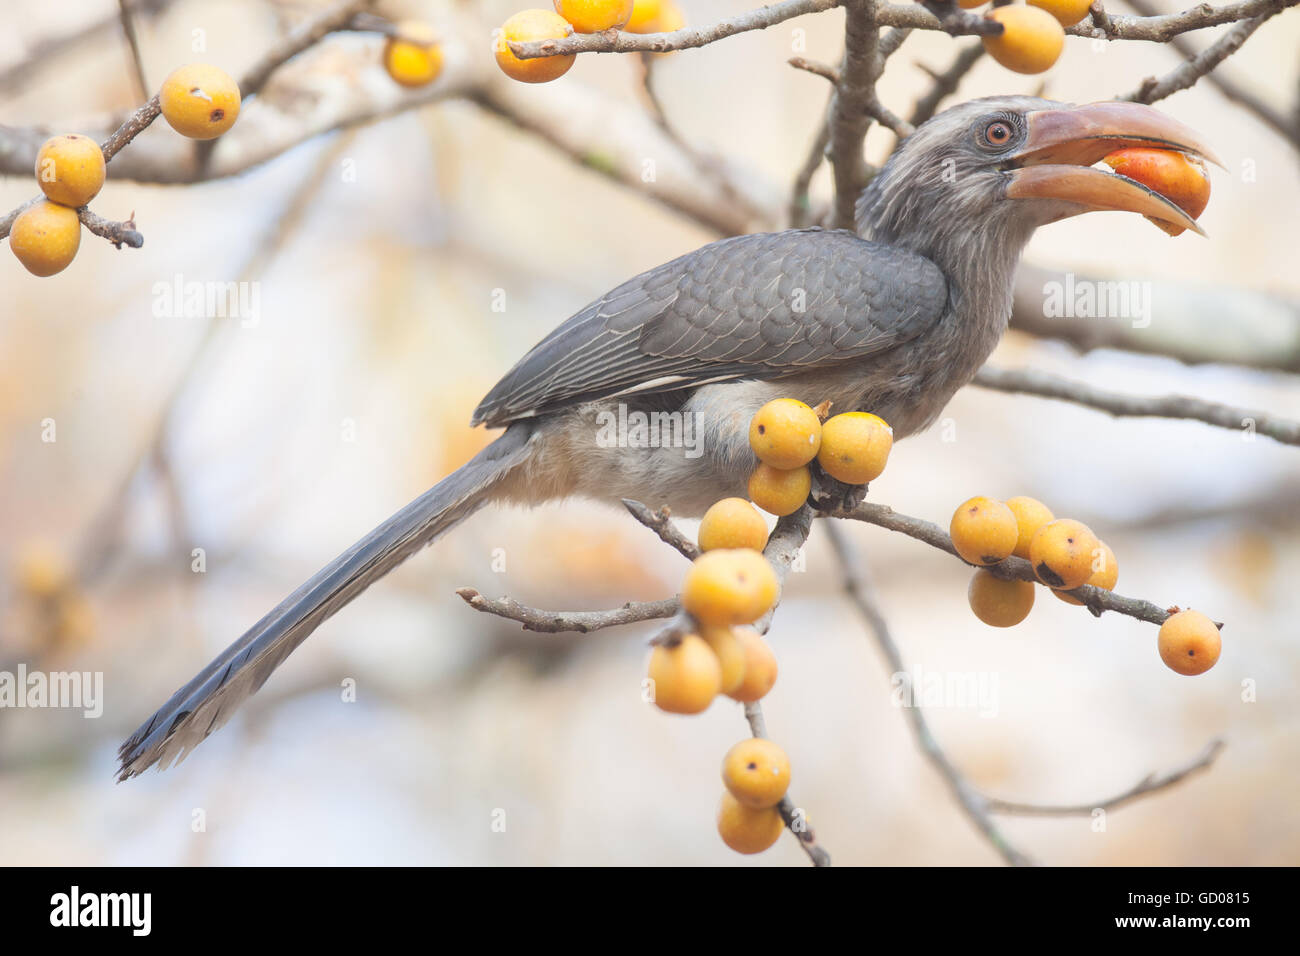 Malabar grey hornbill (Ocyceros griseus)  is a hornbill endemic to the Western Ghats and associated hills of southern India. Stock Photo